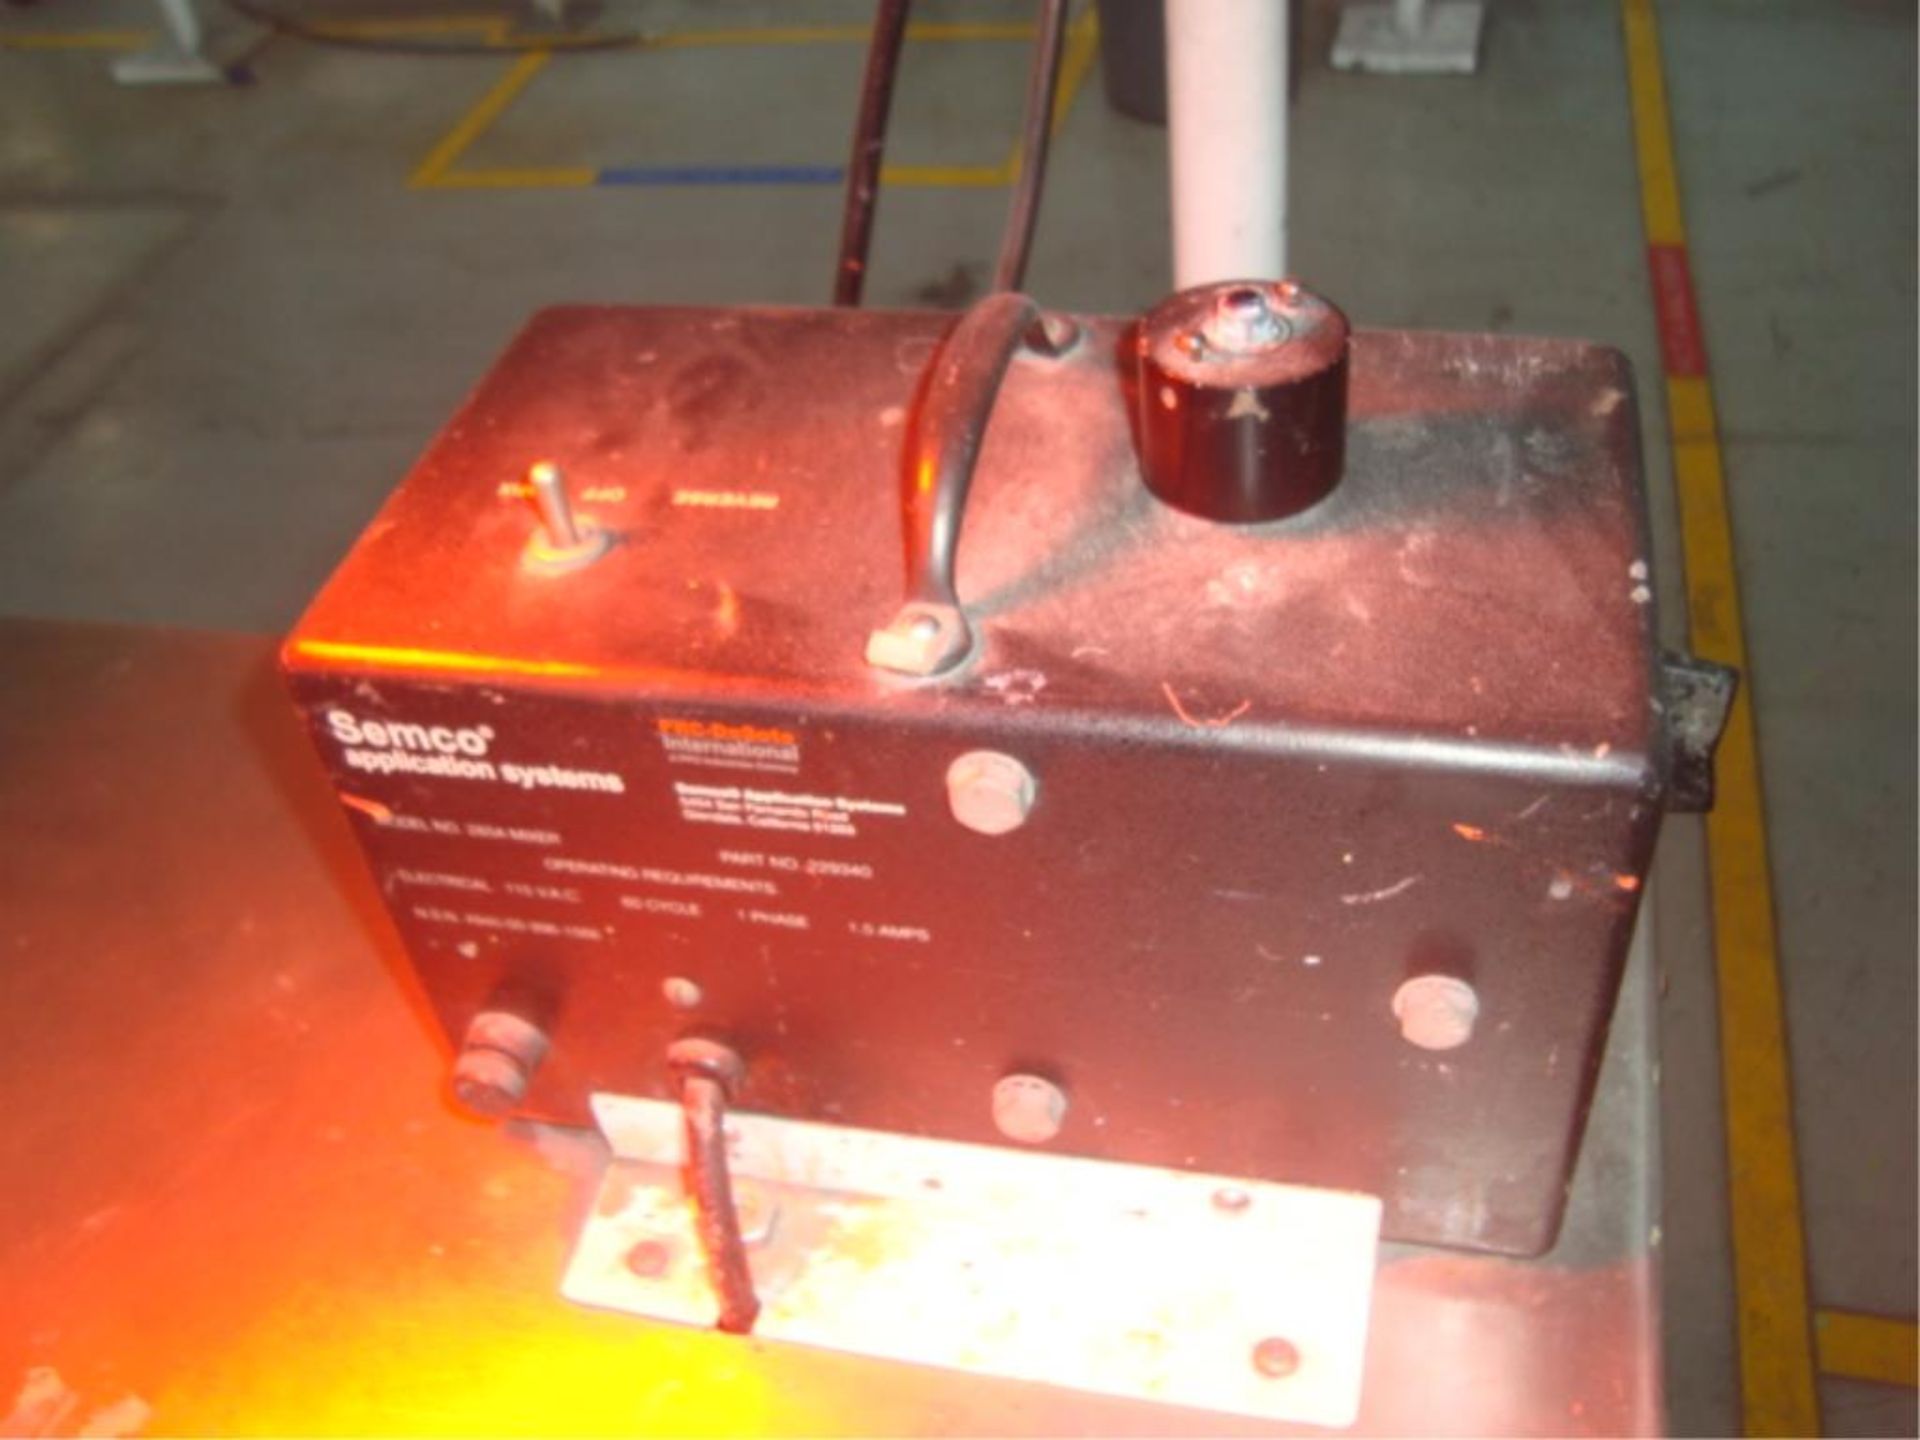 Sealant Mixing Station With Heat Curing Lamp - Image 2 of 4